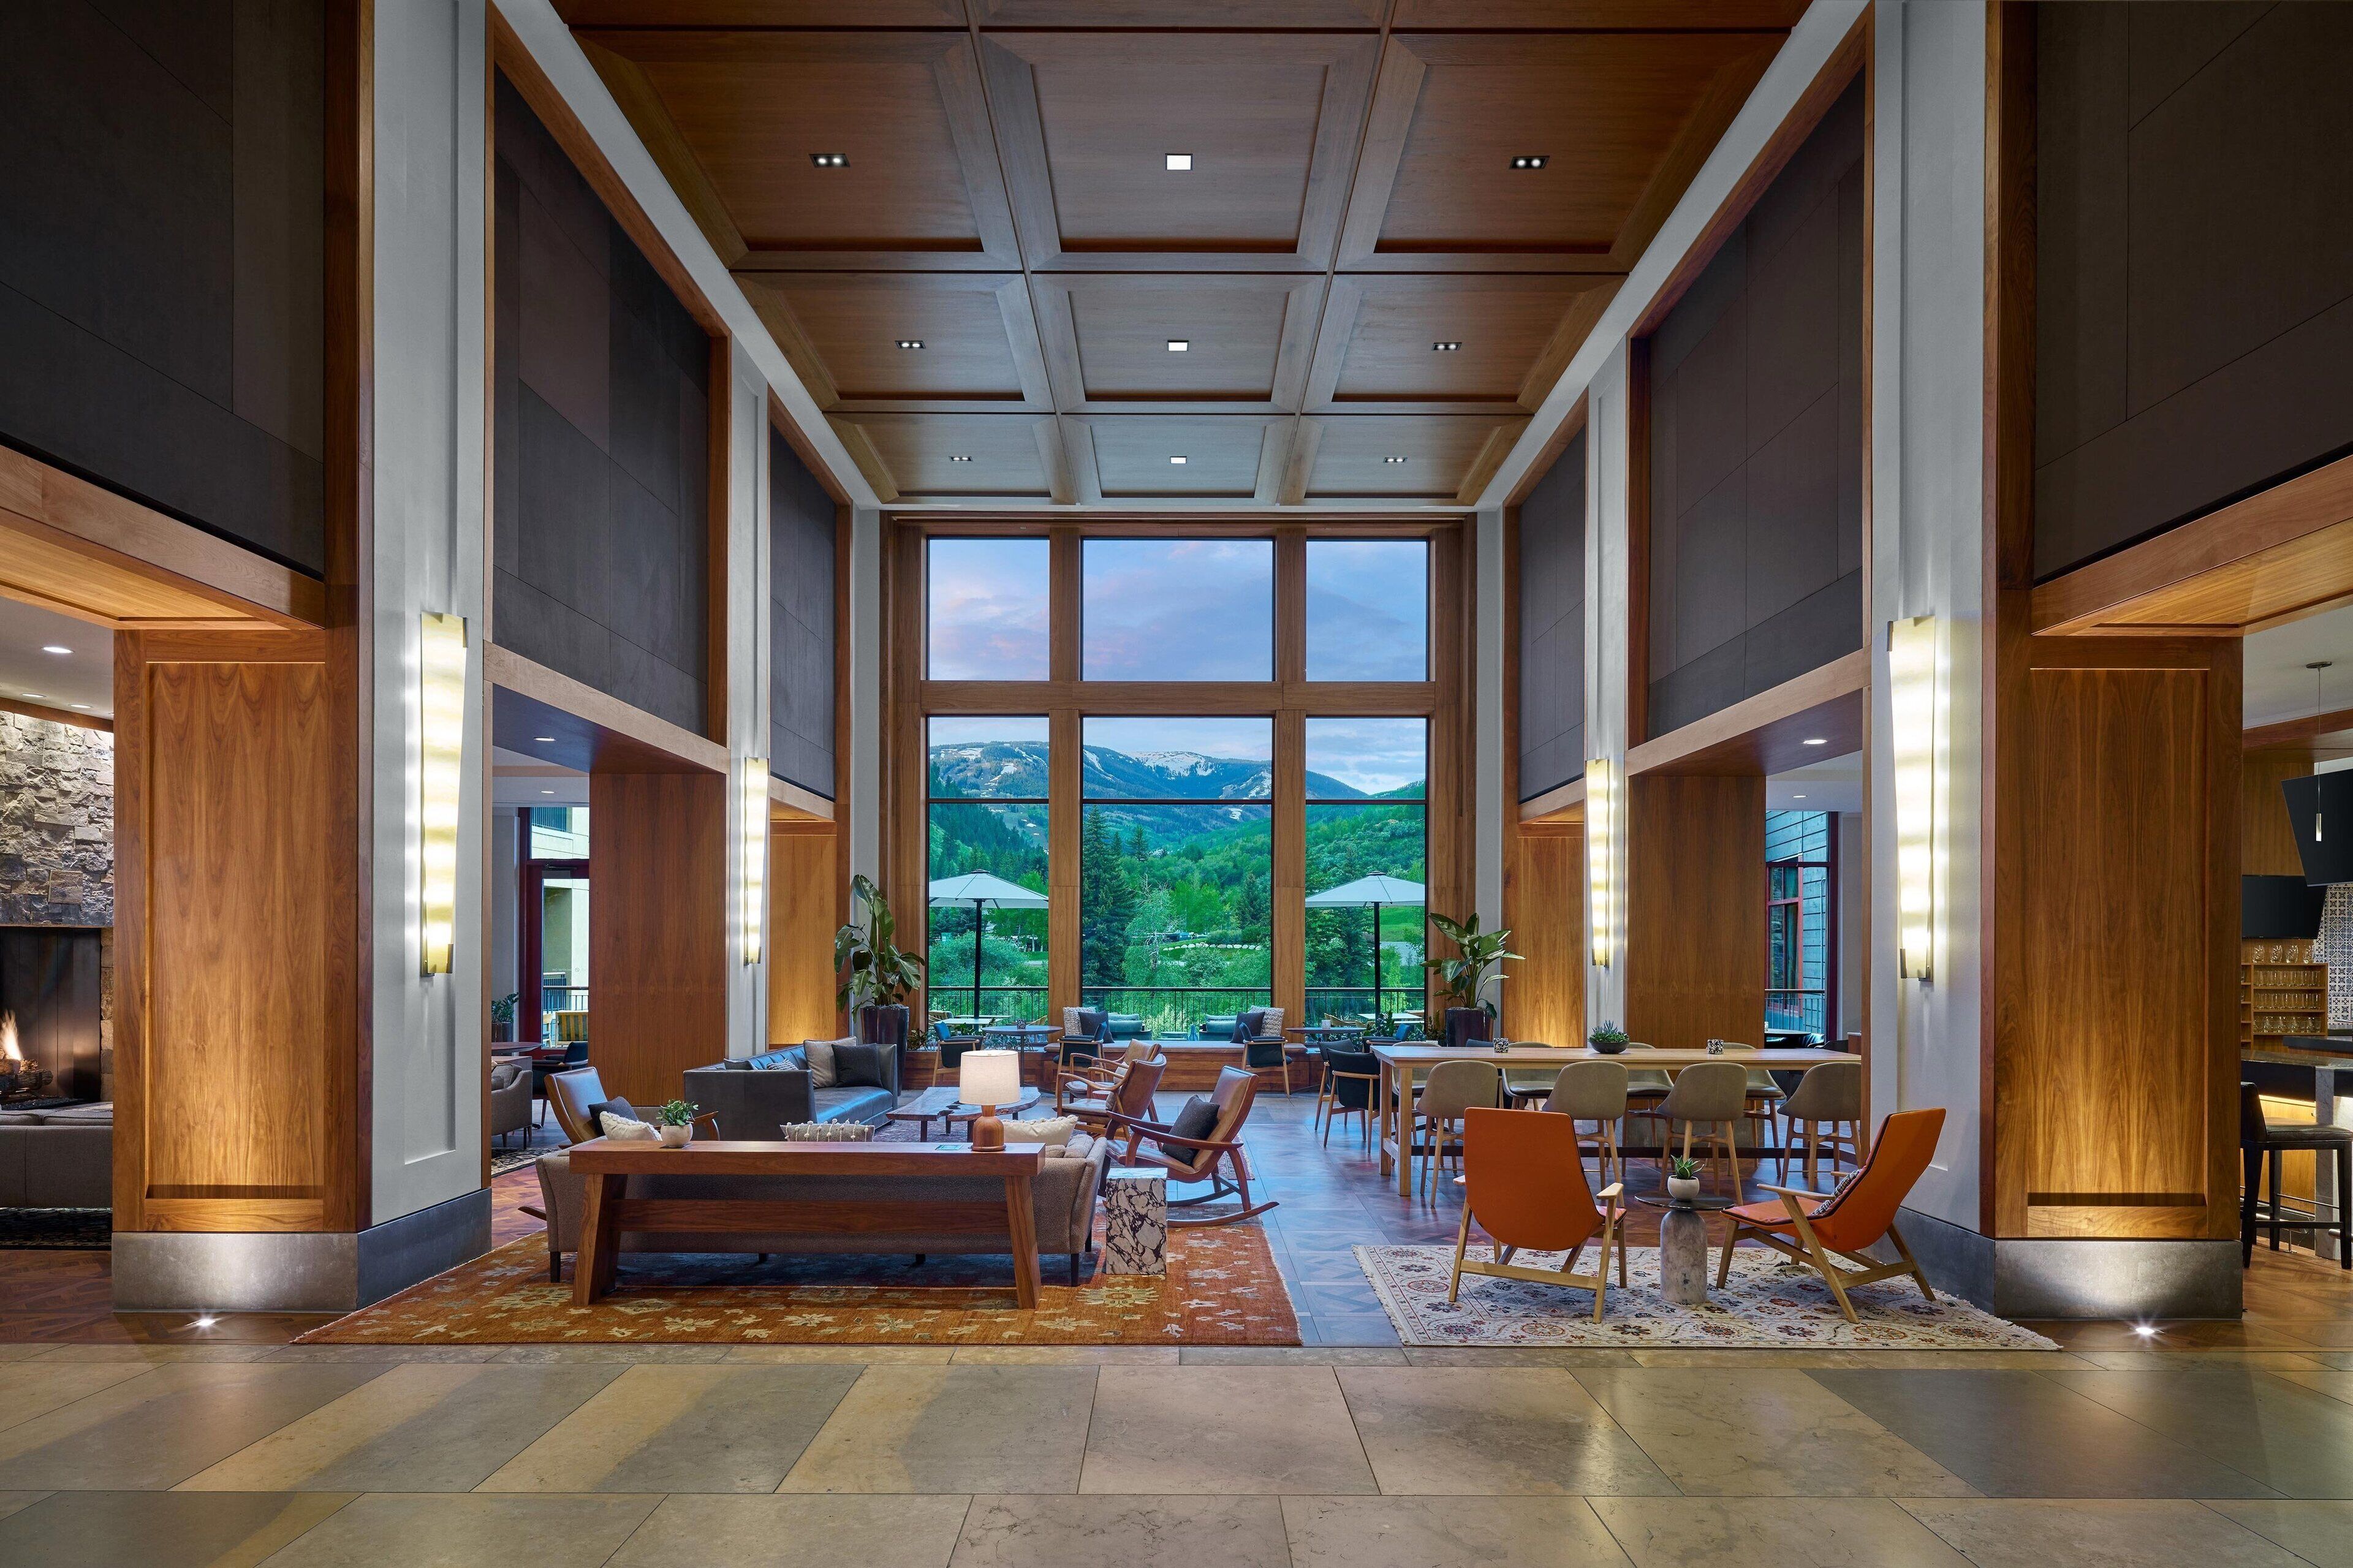 Lobby view of The Westin Riverfront Resort & Spa, Avon, Vail Valley